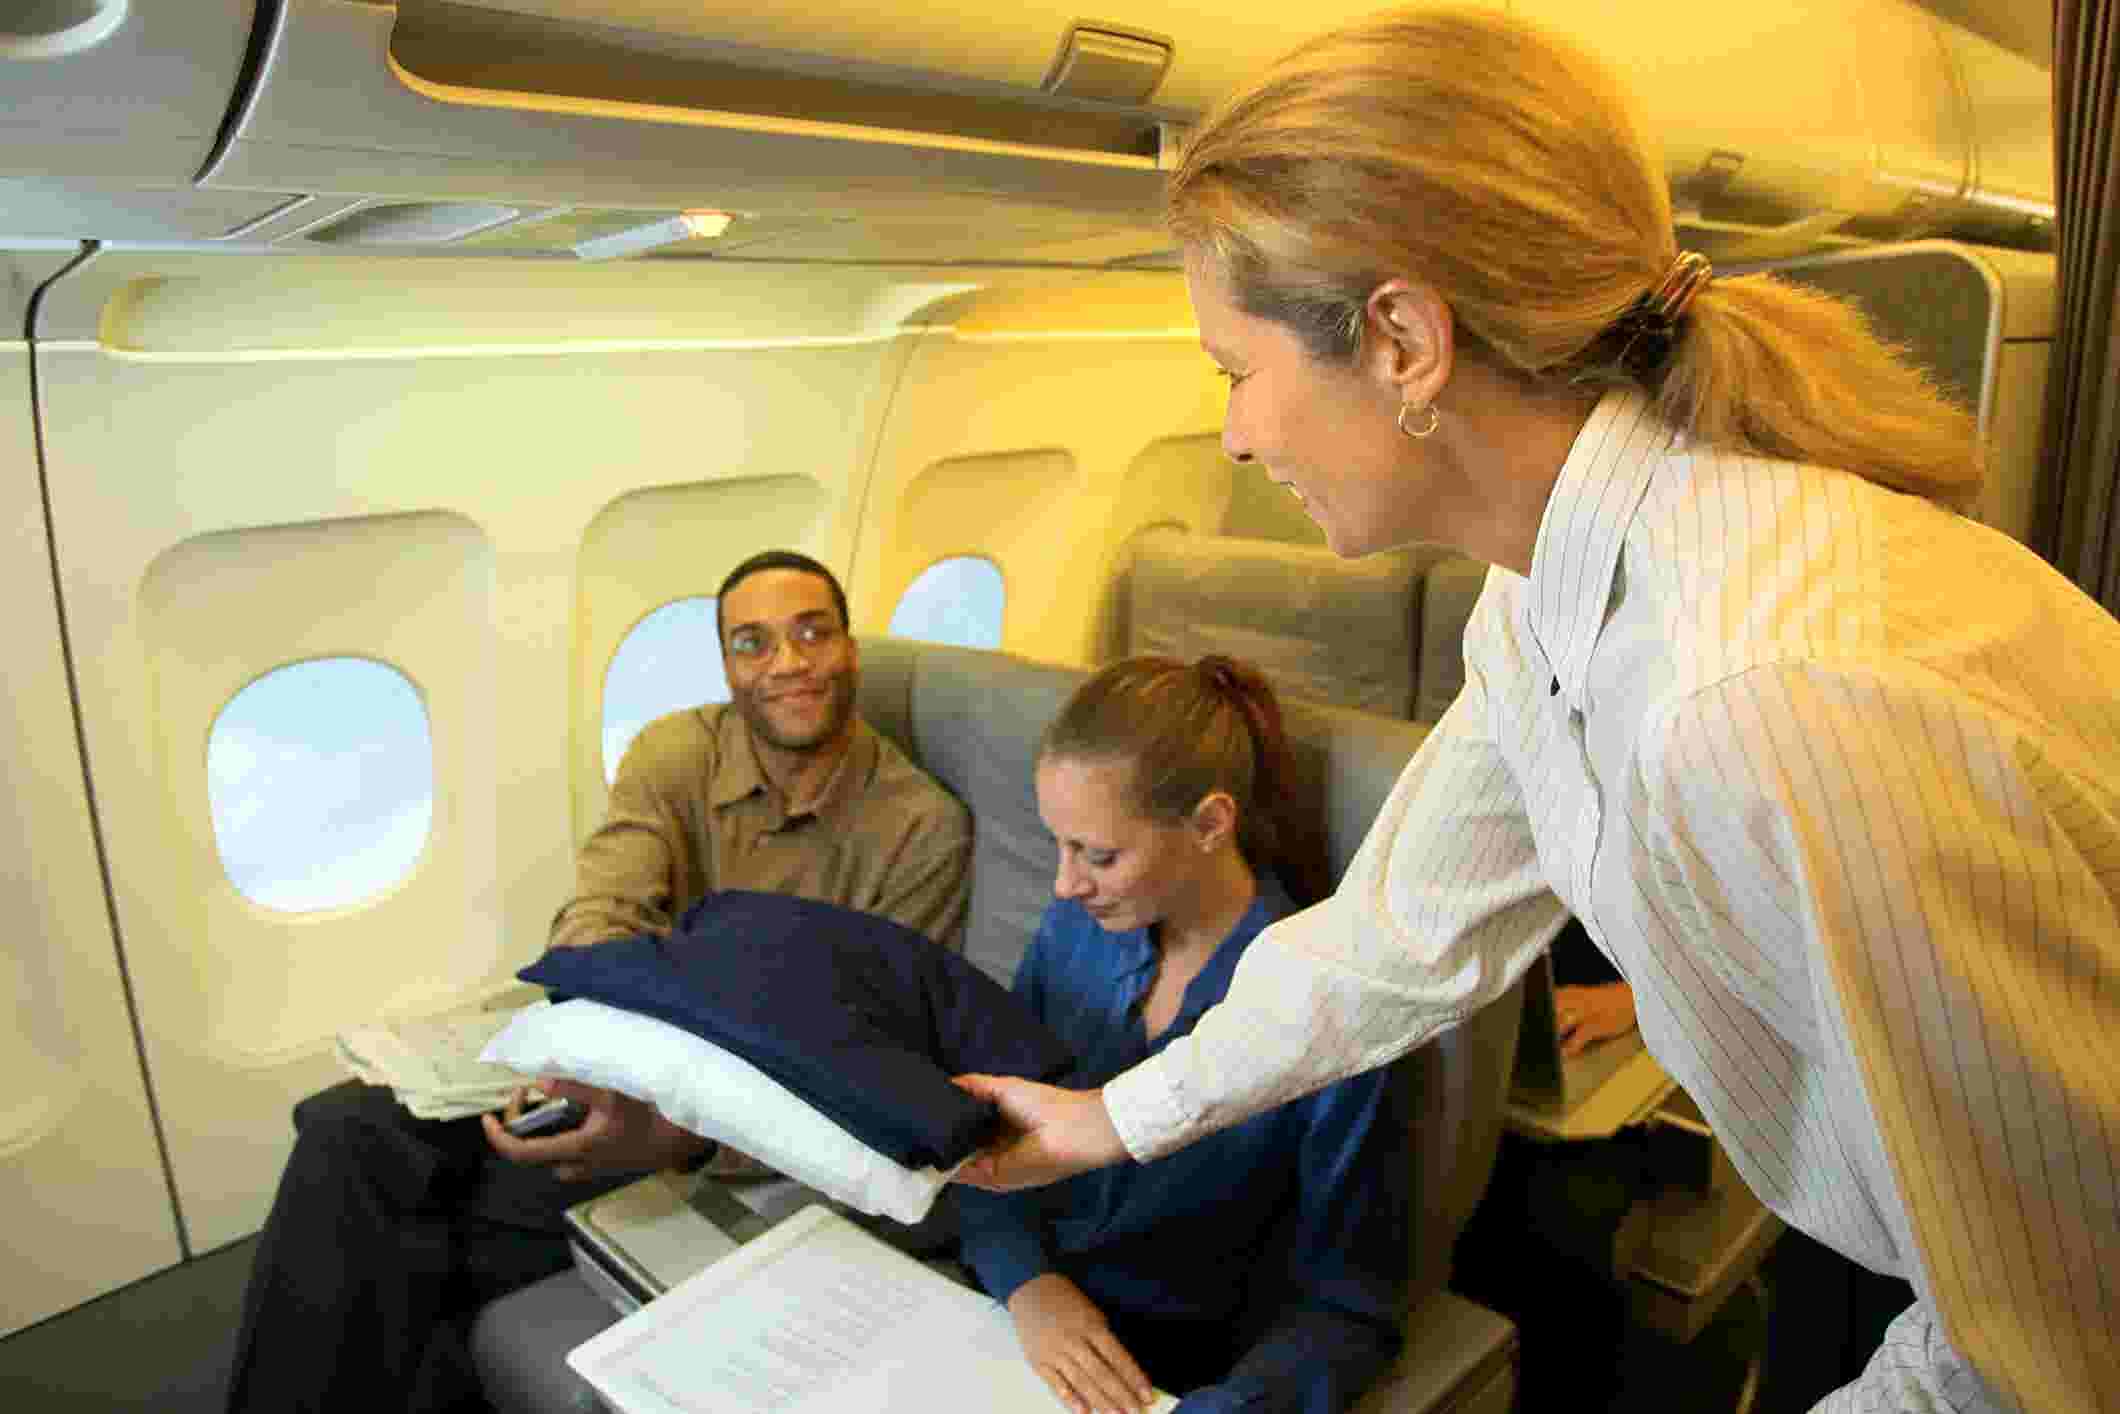 Flight Attendants Hate When Passengers Do These 5 Things